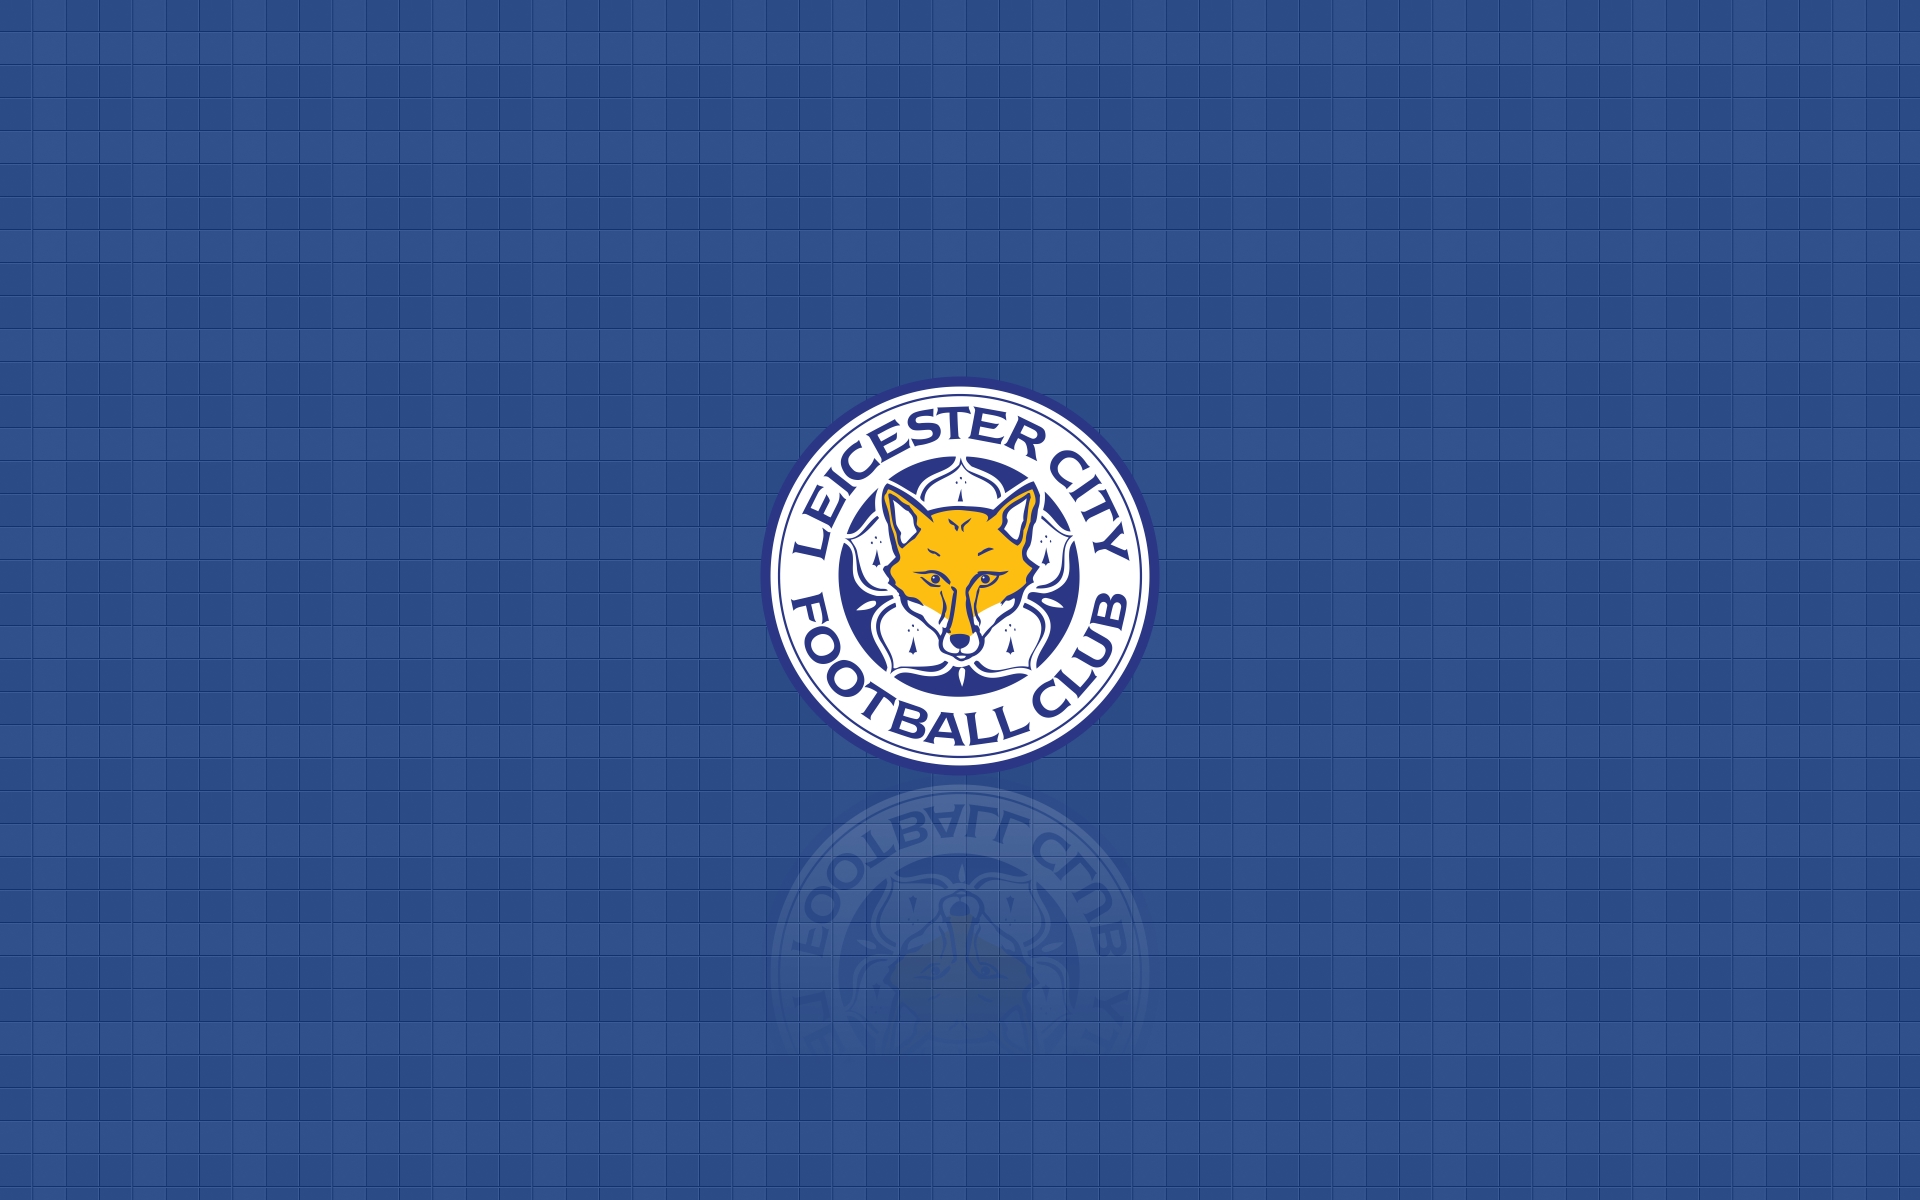 General 1920x1200 Leicester City F.C. logo Football  soccer clubs British